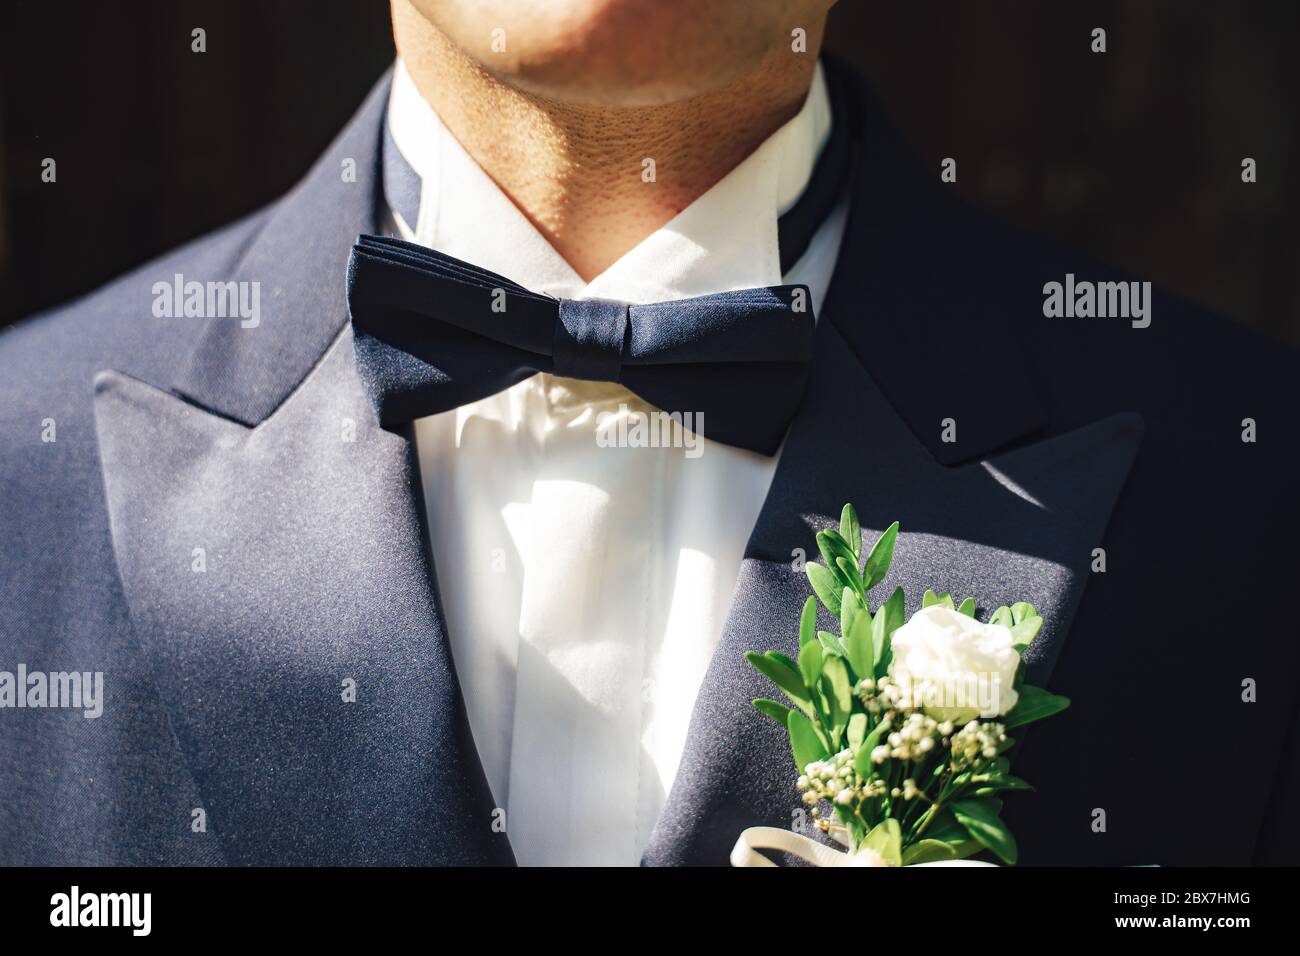 Close up shot of man in white shirt and blue suit with blue bow tie and flower wedding boutonniere. Dark background. Stock Photo